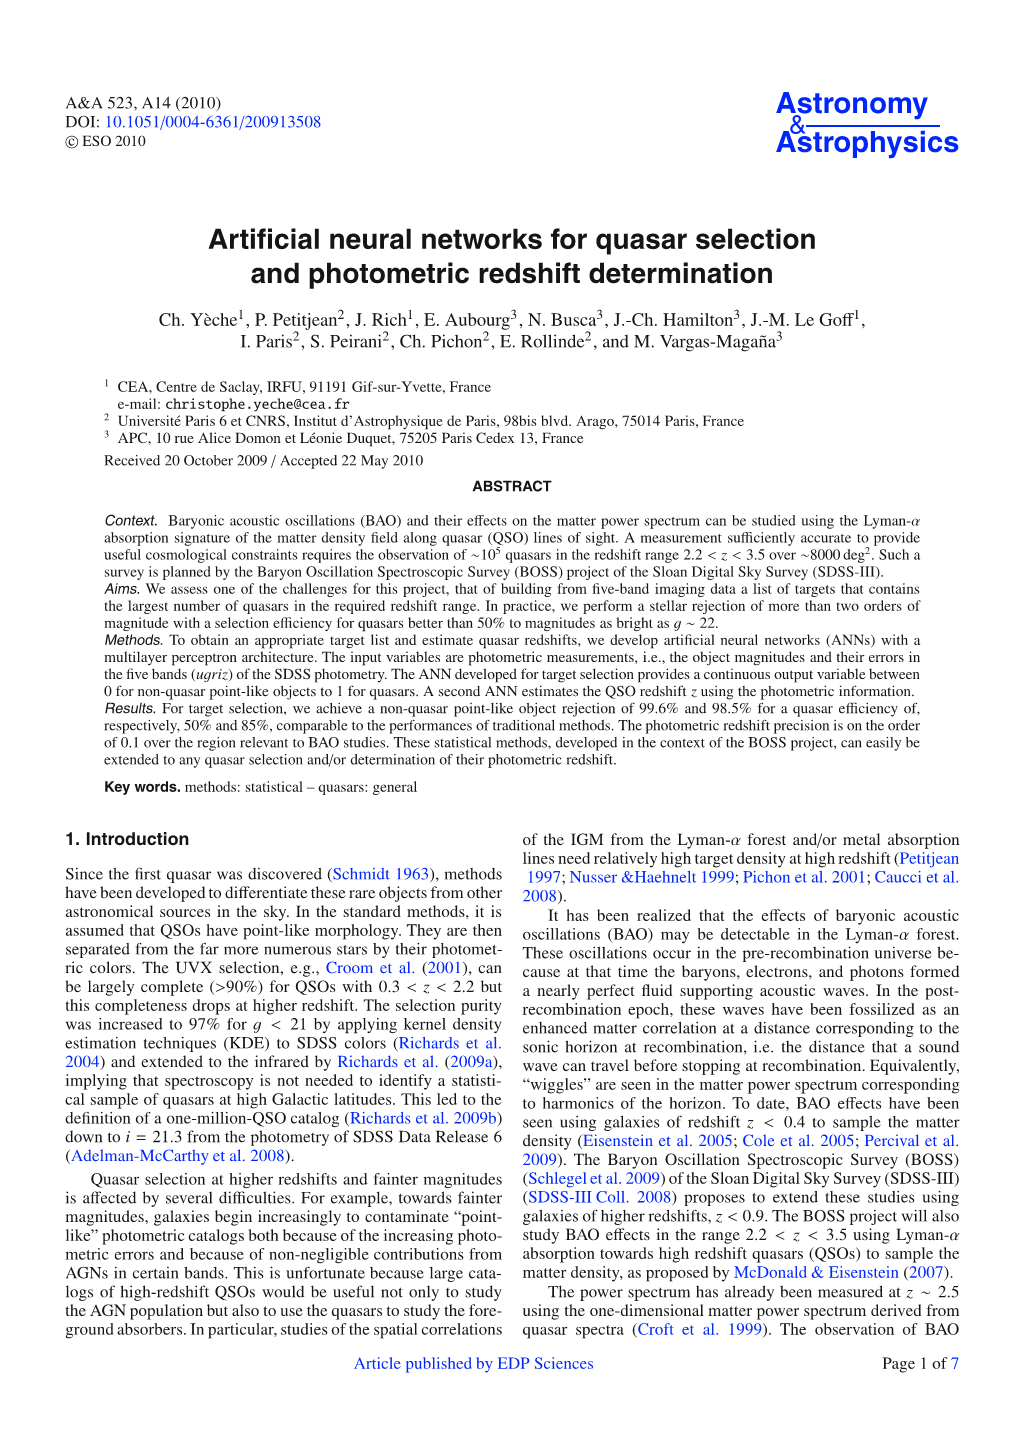 Artificial Neural Networks for Quasar Selection and Photometric Redshift Determination